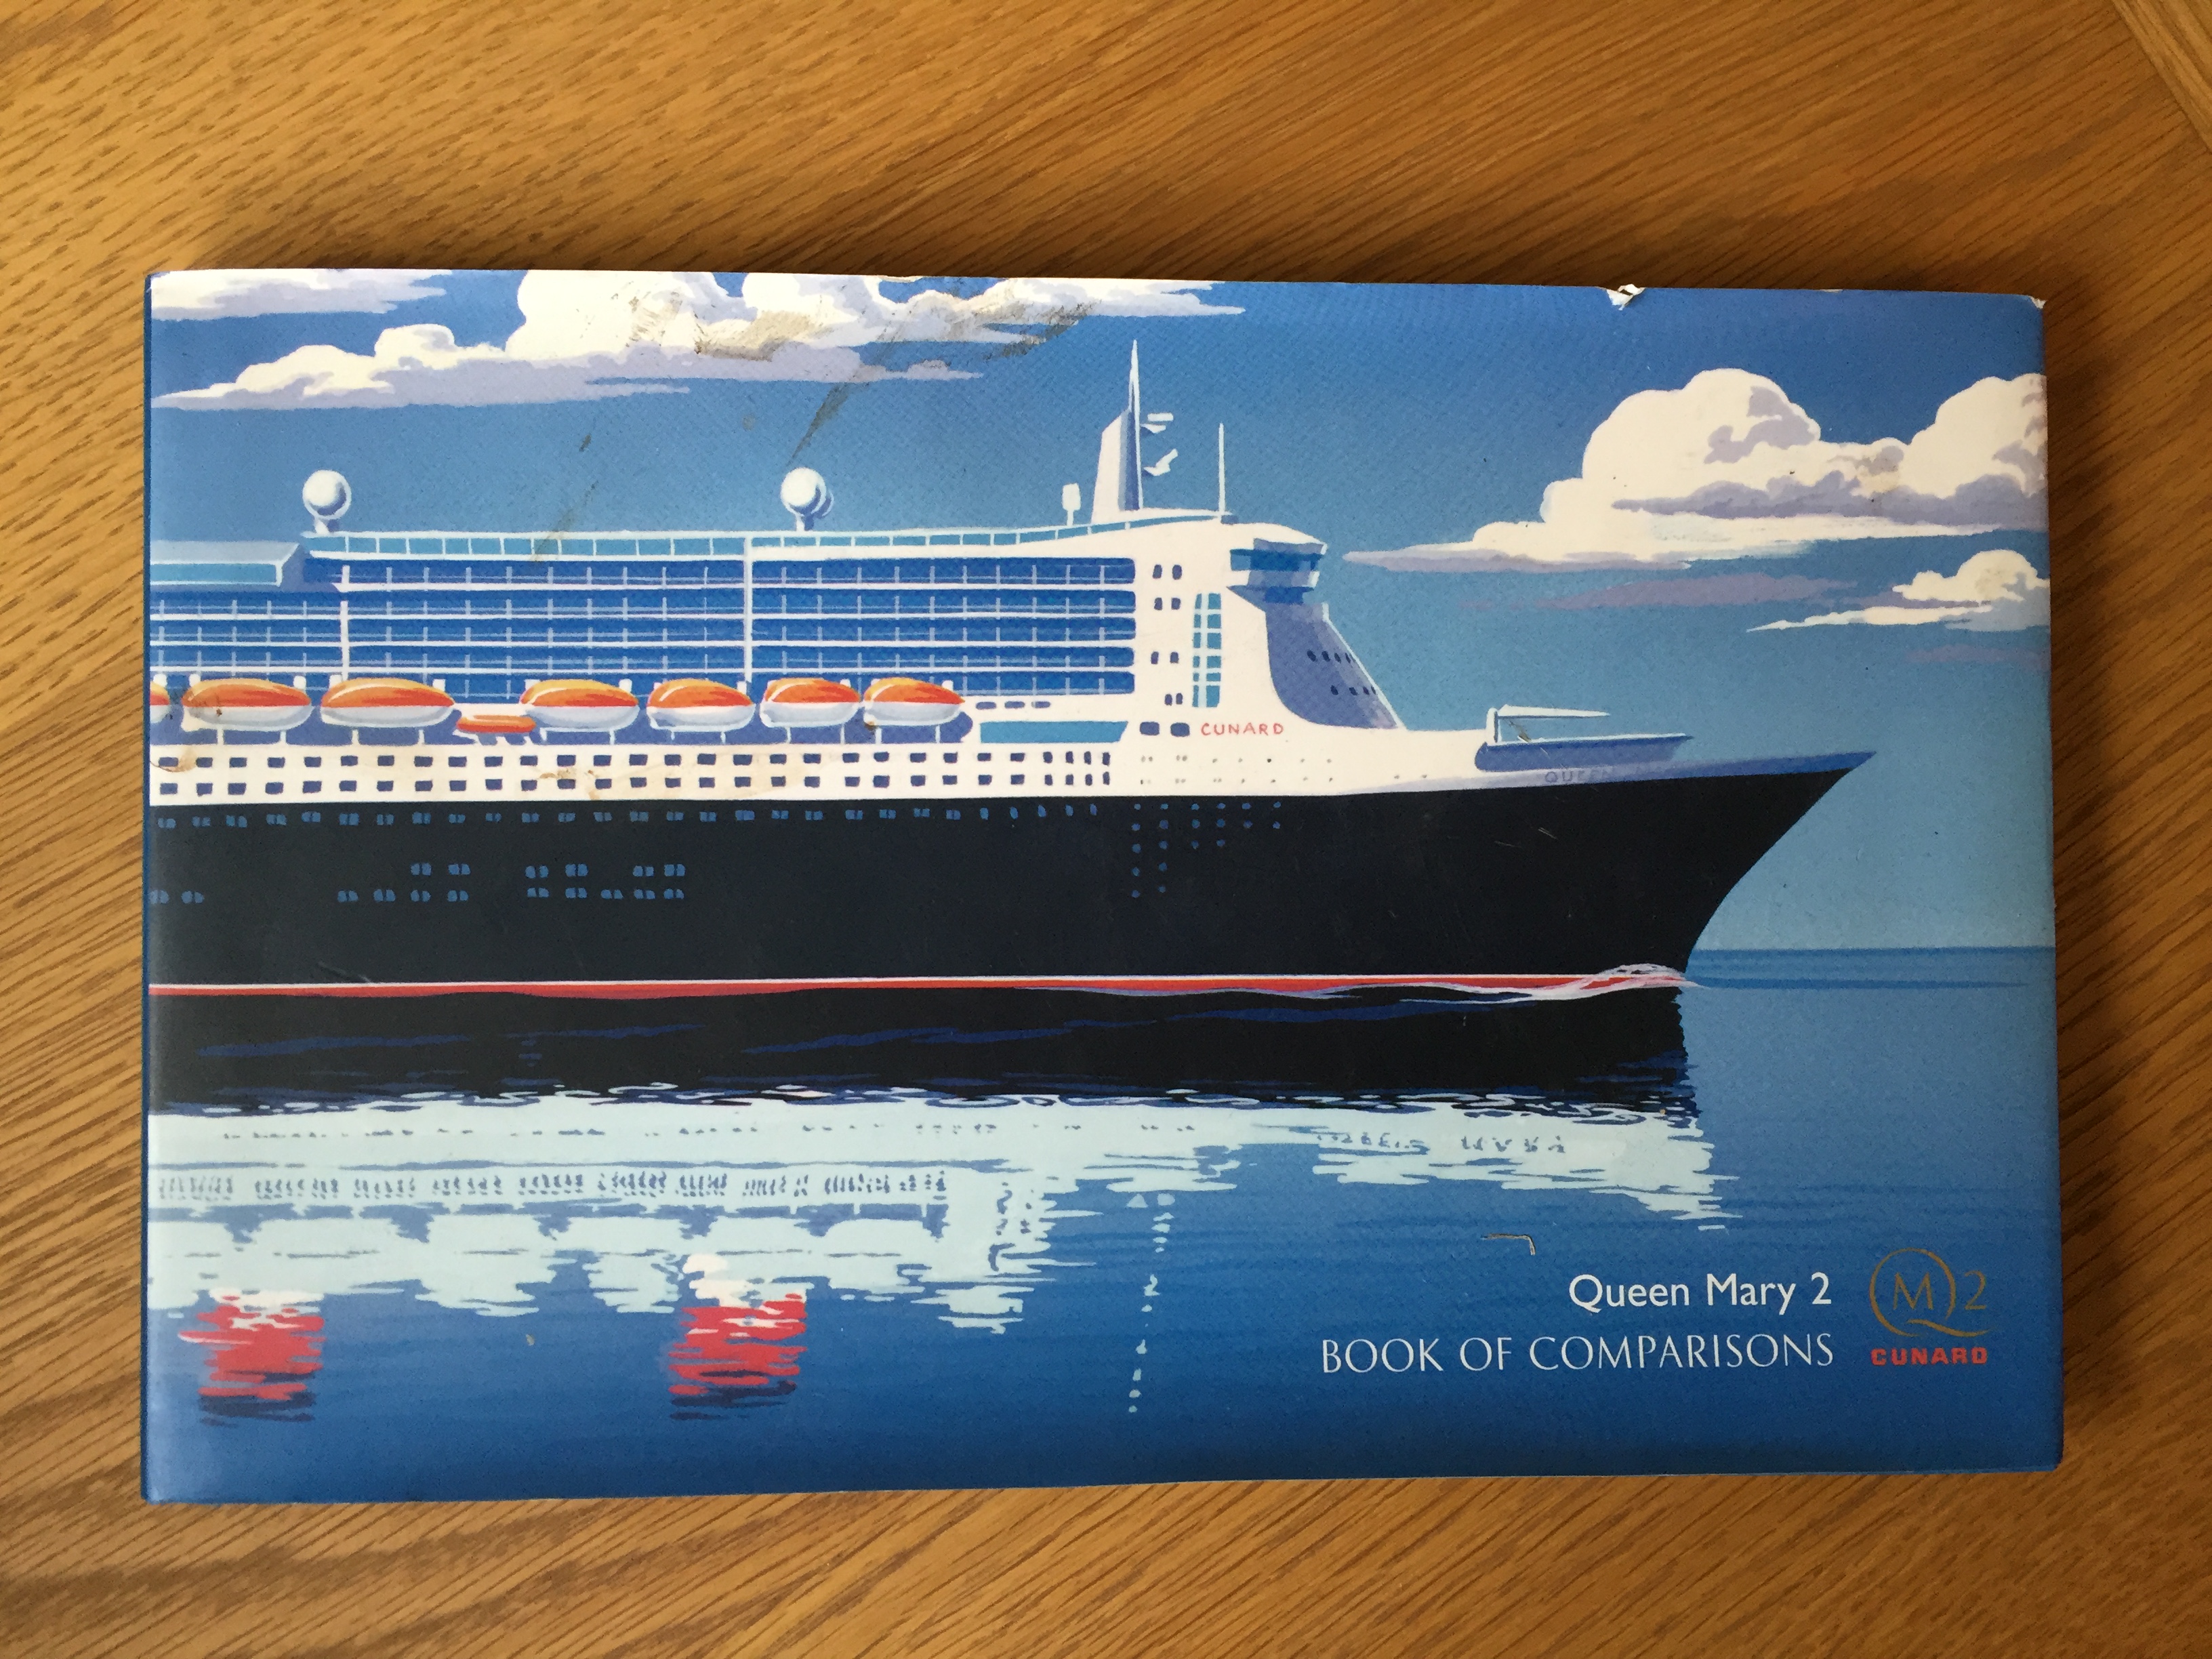 RMS QUEEN MARY 2 LAUNCH BOOK OF COMPARISONS 